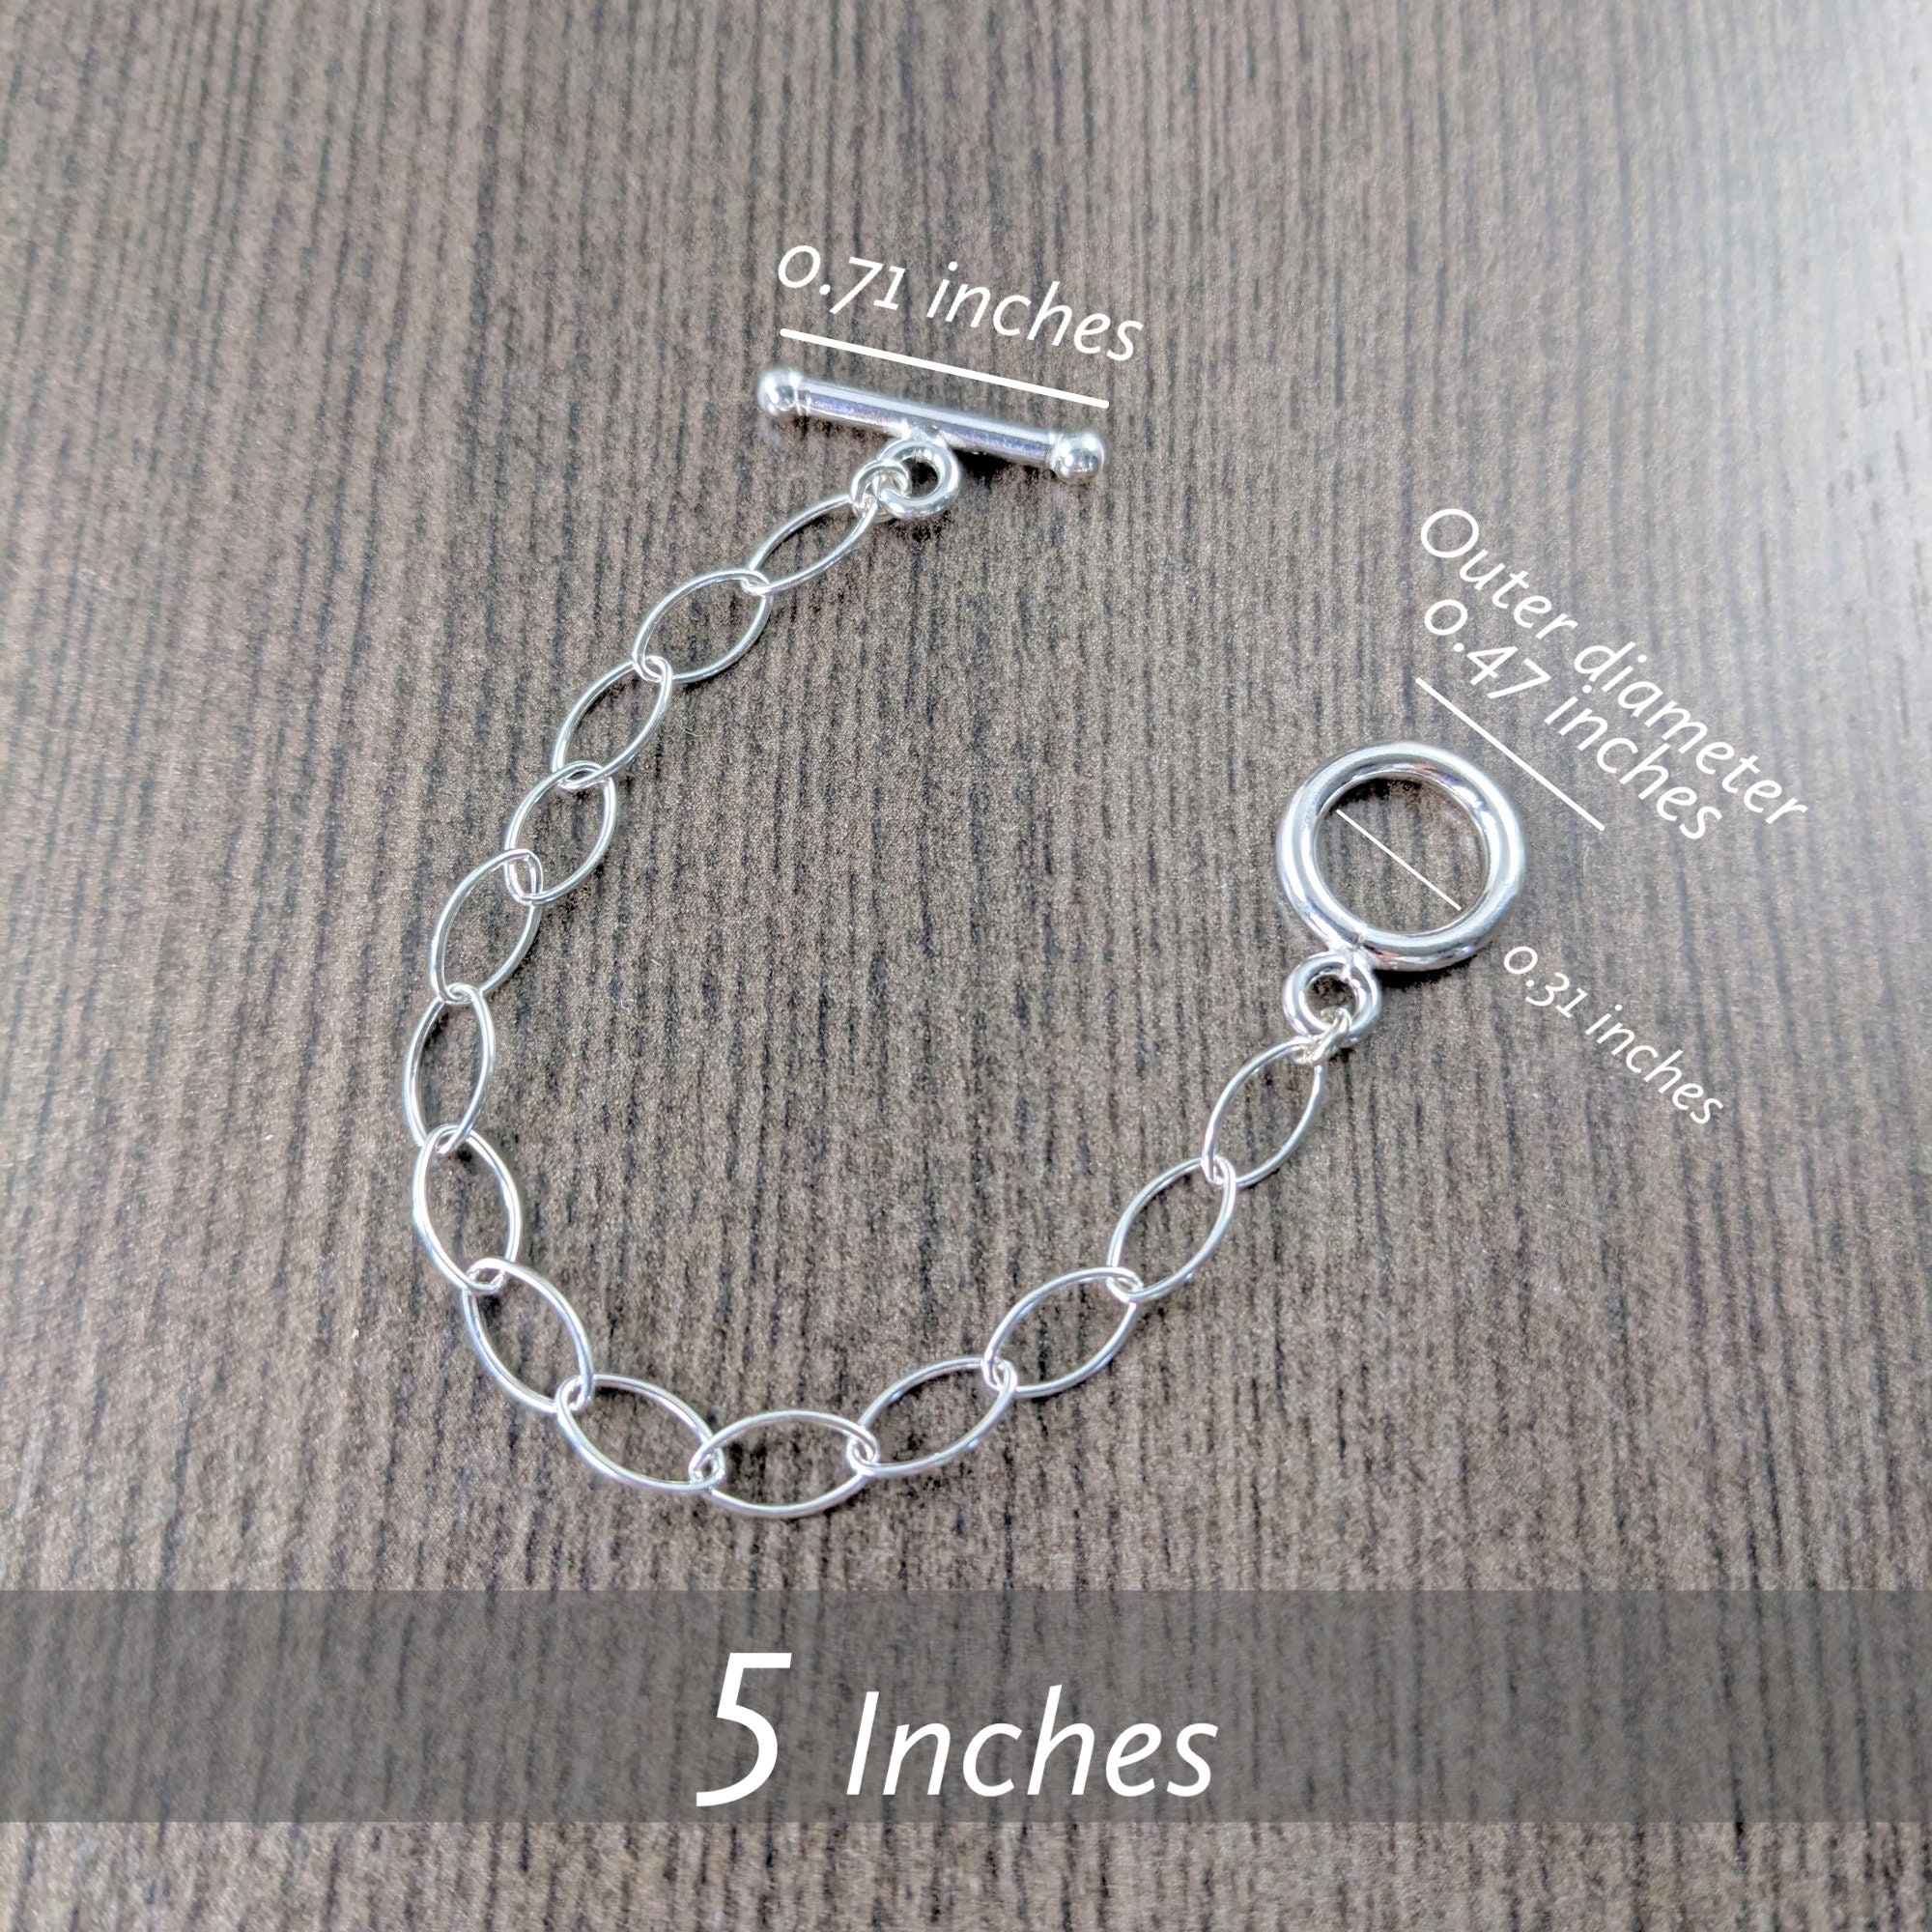  Solid 925 Sterling Silver Necklace Extenders Set, 3Pcs Silver  Extension Chain with Durable Sturdy Spring Clasp for Jewelry Making 2 4 6  Inch : Arts, Crafts & Sewing